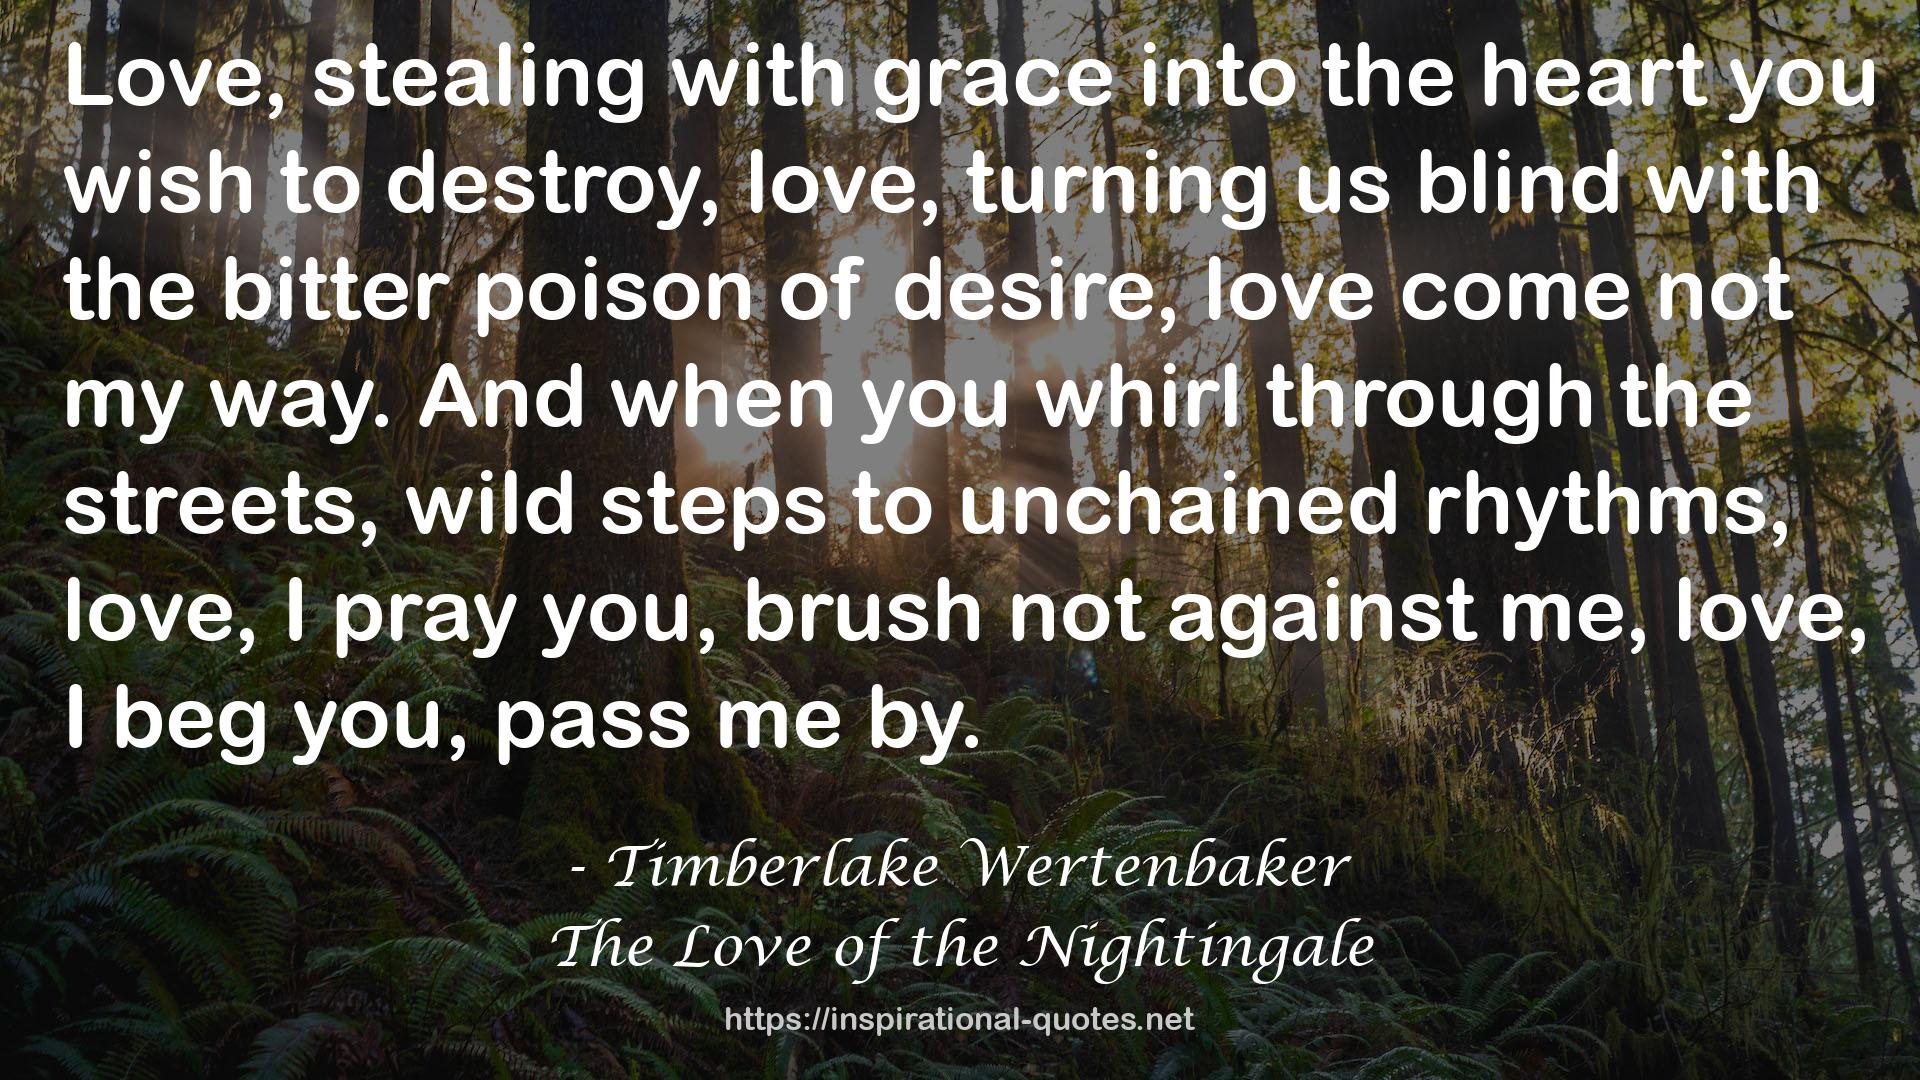 The Love of the Nightingale QUOTES